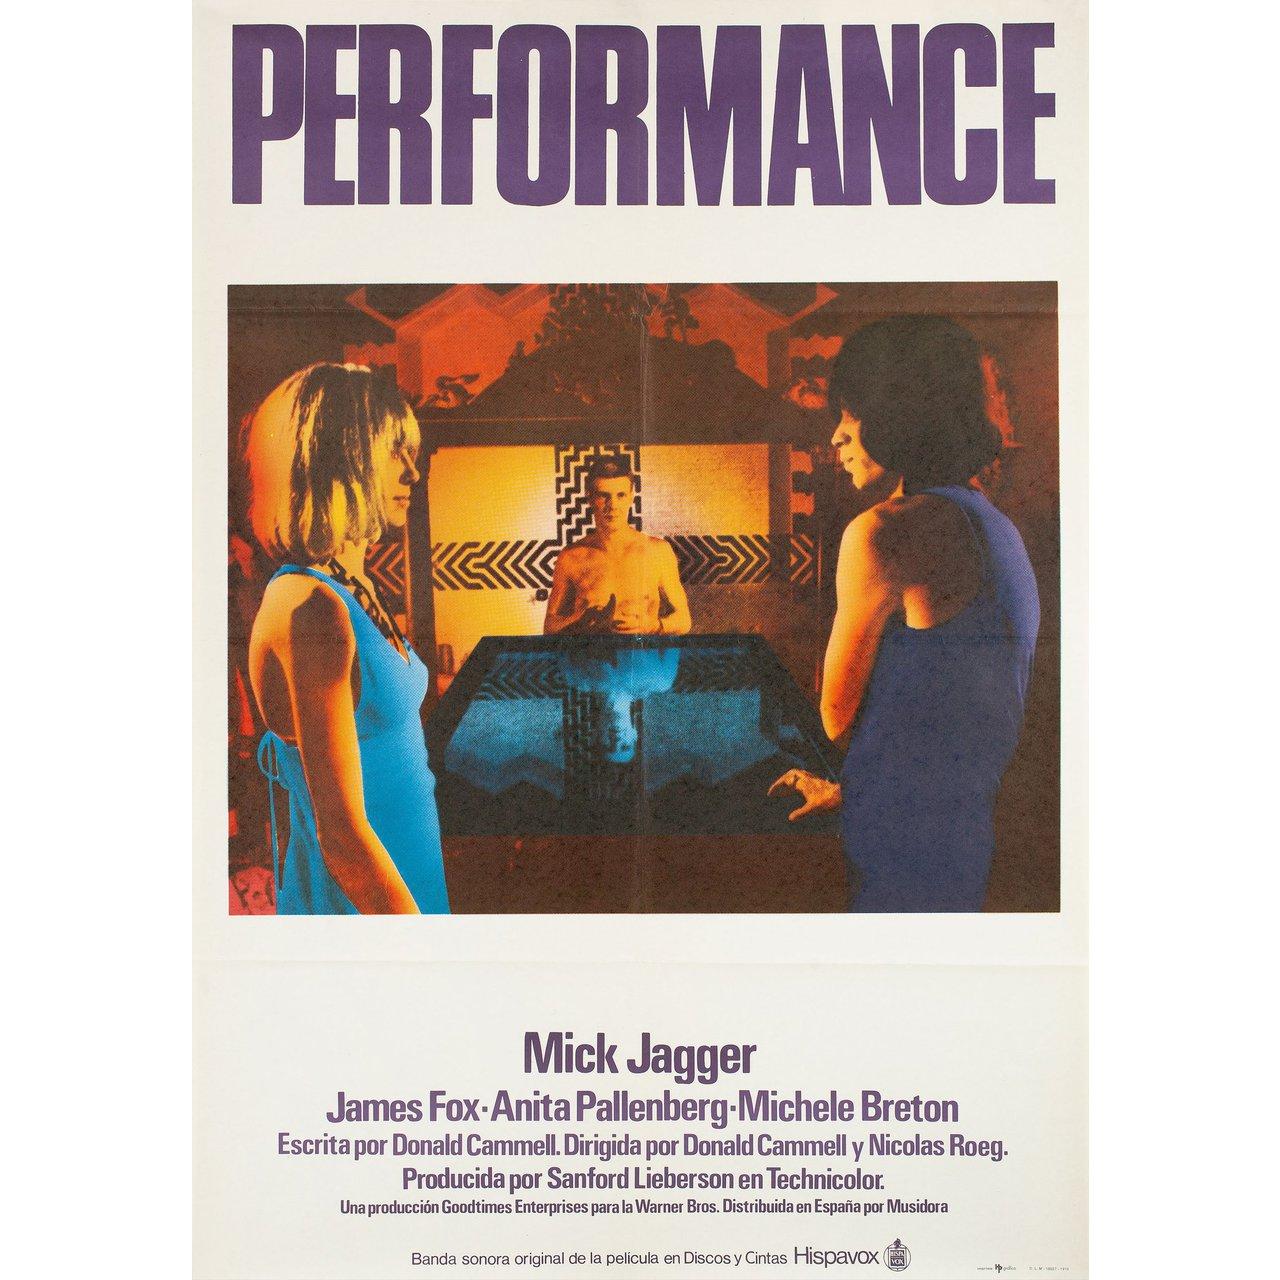 Original 1978 re-release Spanish B1 poster for the 1970 film Performance directed by Donald Cammell / Nicolas Roeg with James Fox / Mick Jagger / Anita Pallenberg / Michele Breton. Fine condition, folded. Many original posters were issued folded or